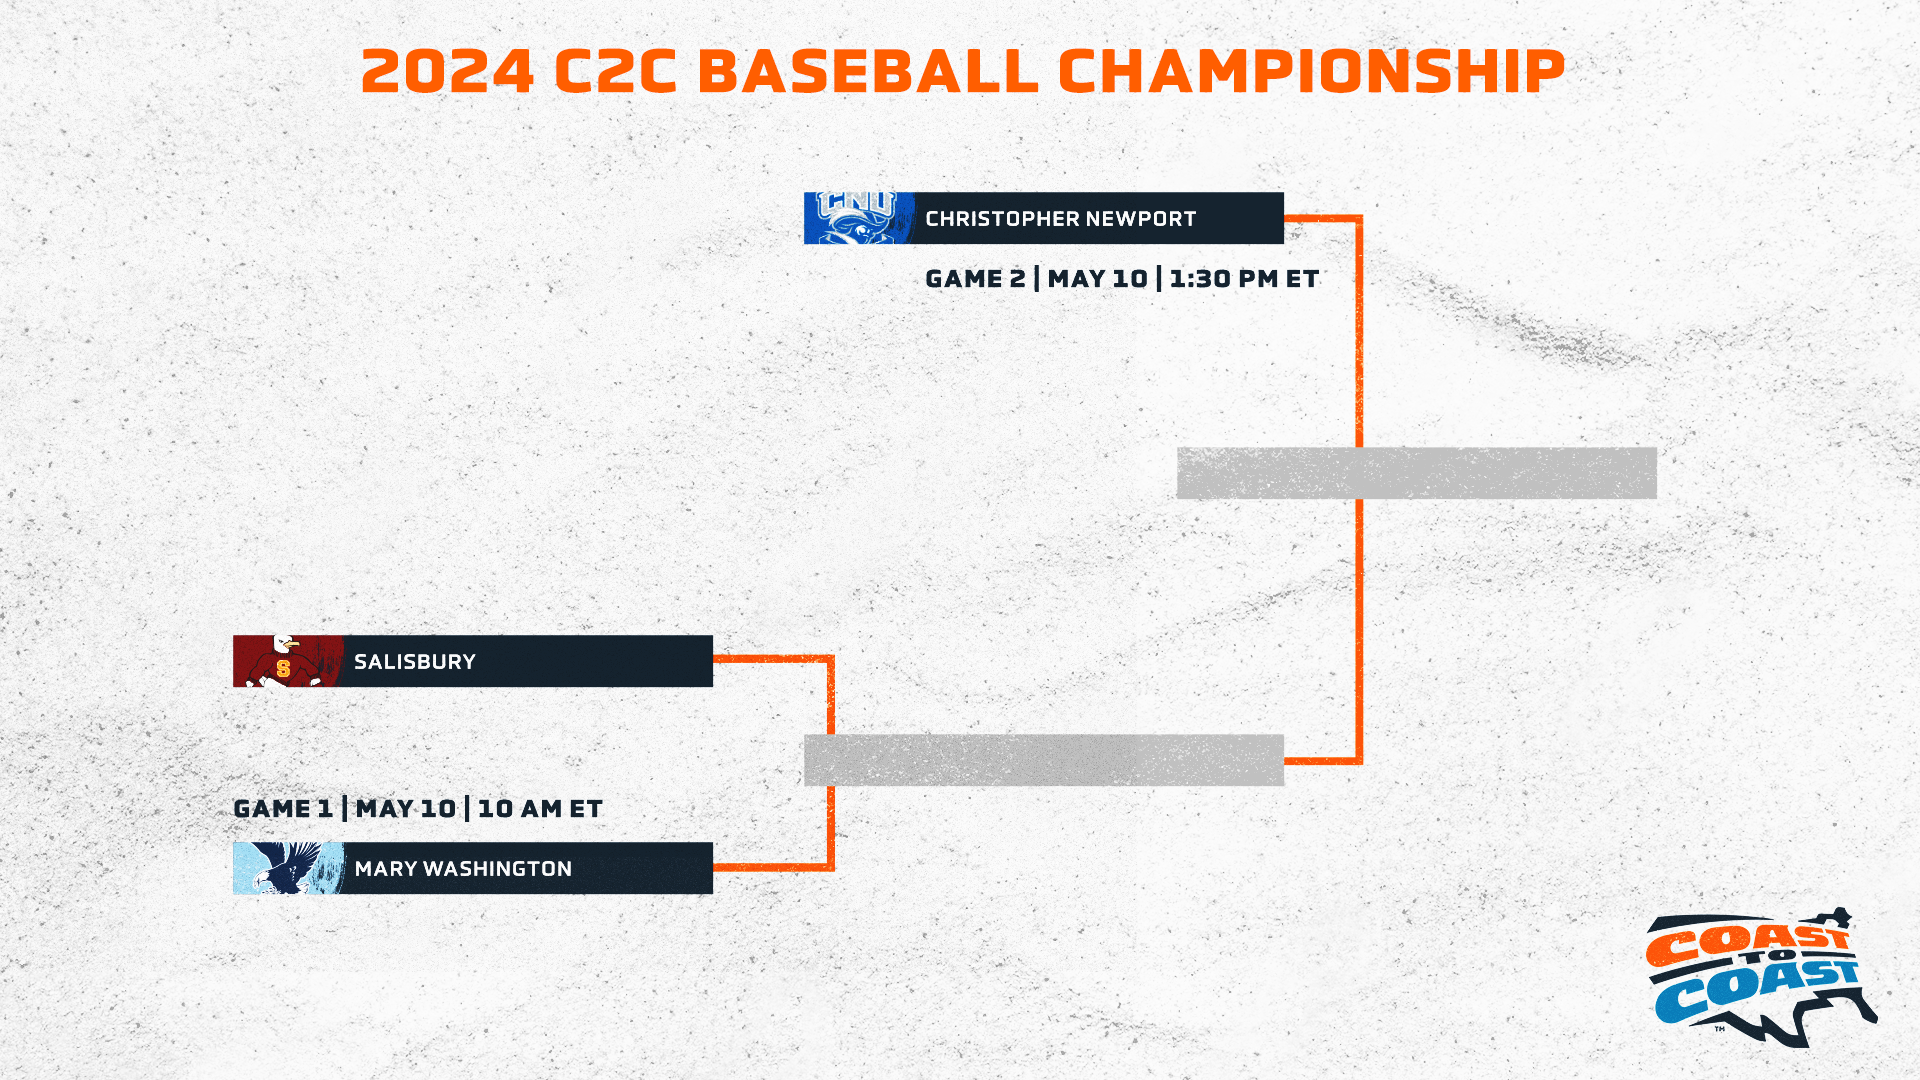 Captains Earn Top Seed in C2C Baseball Championship; Game Times Moved Up